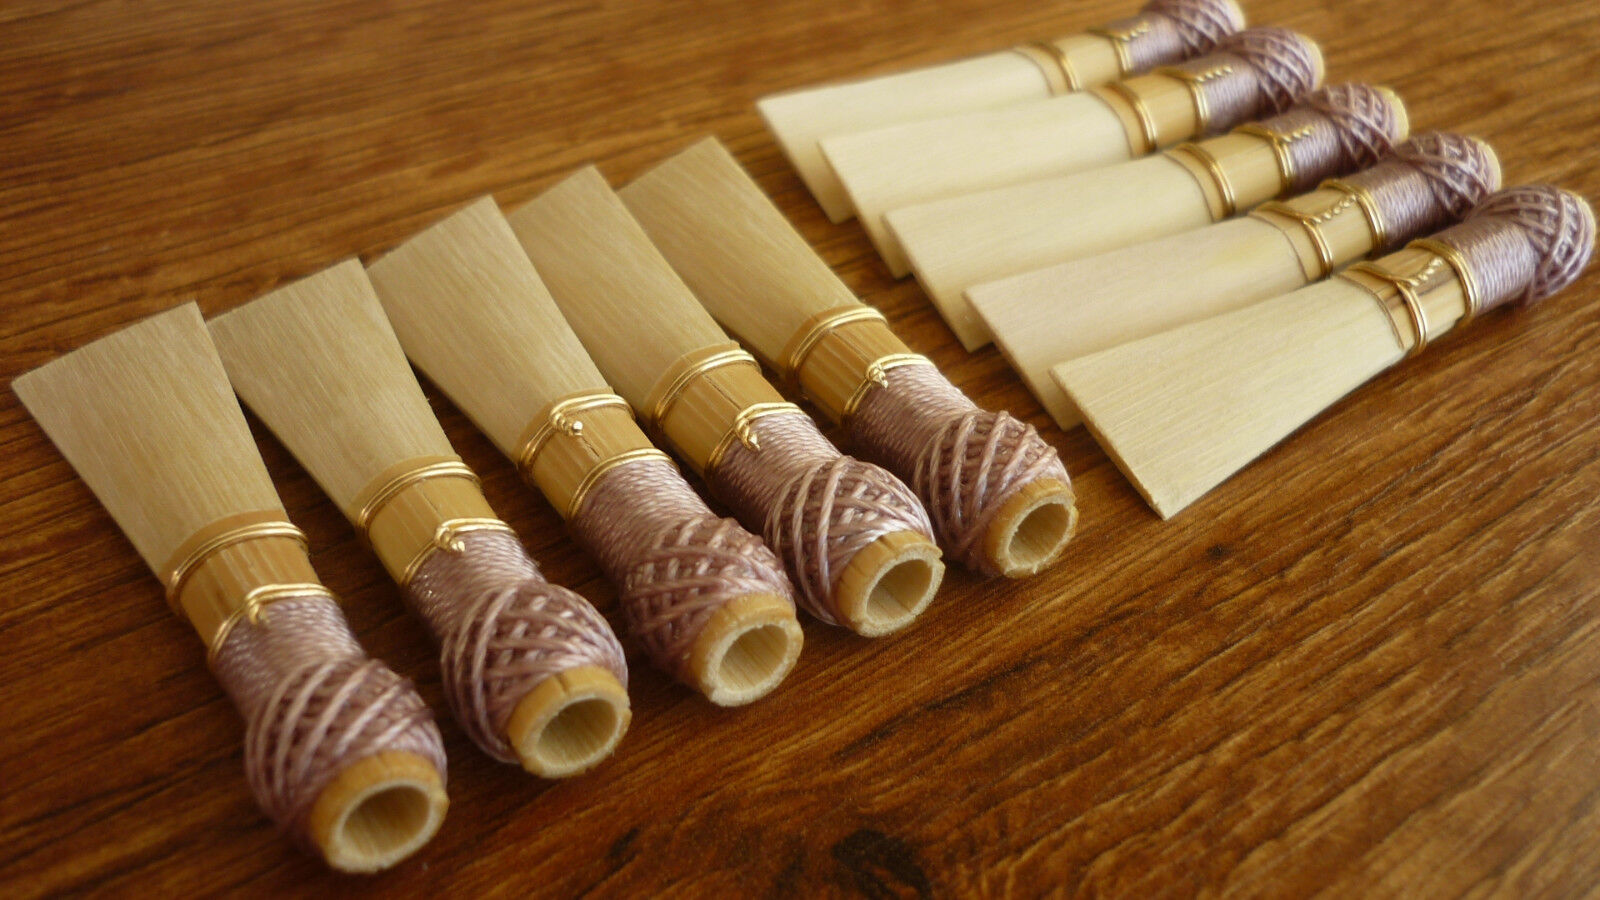 10 high quality bassoon reed blanks from Lavoro cane R1 /dukov_reeds LoR1/ Laagste prijs, goede kwaliteit